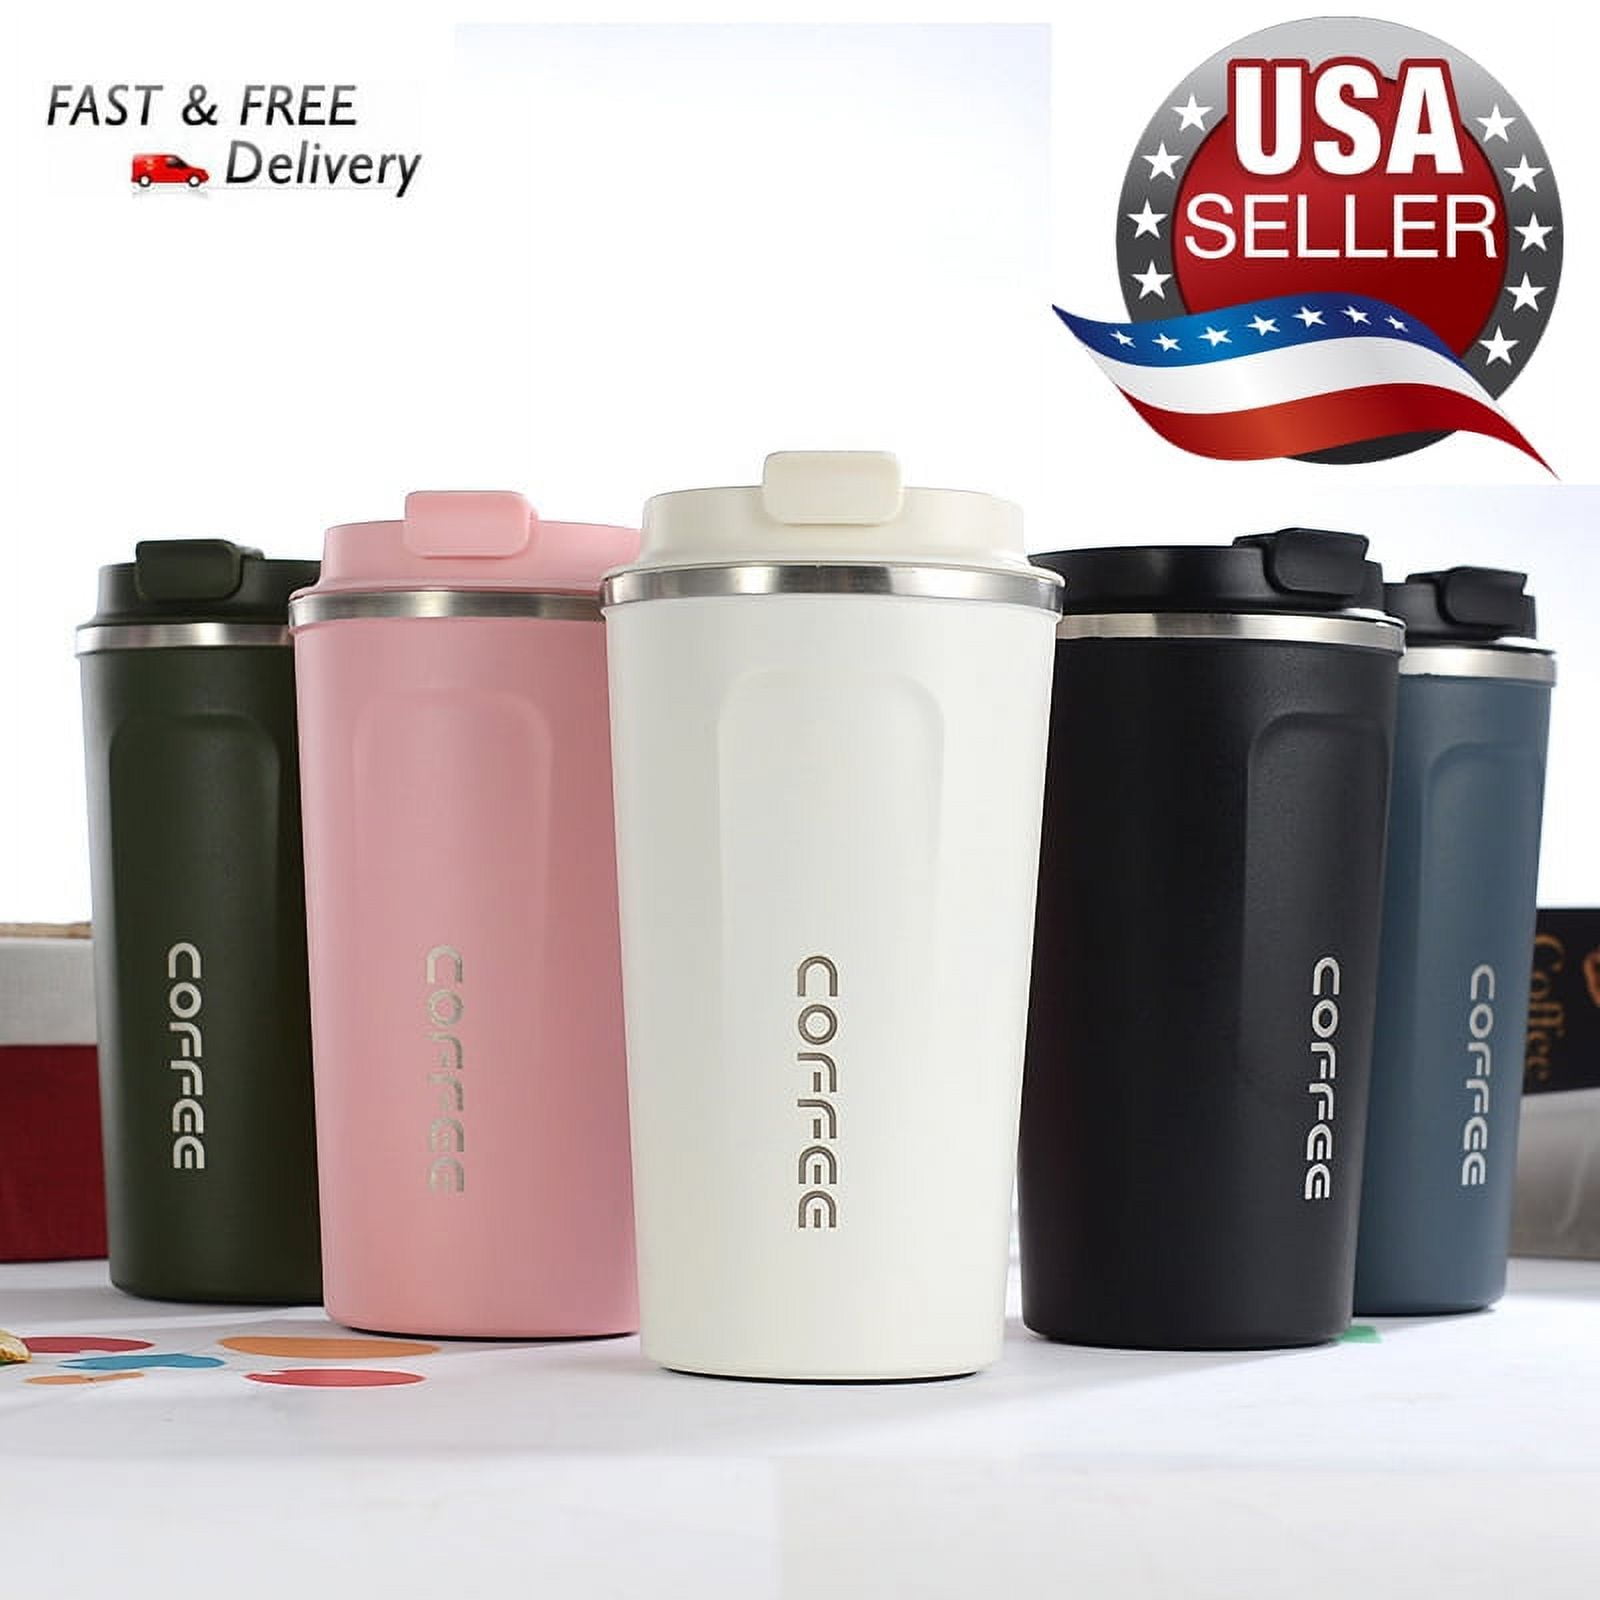 510ML Stainless Steel Car Coffee Cup Leakproof Insulated Thermal Thermos Cup  Car Portable Travel Coffee Mug Green 